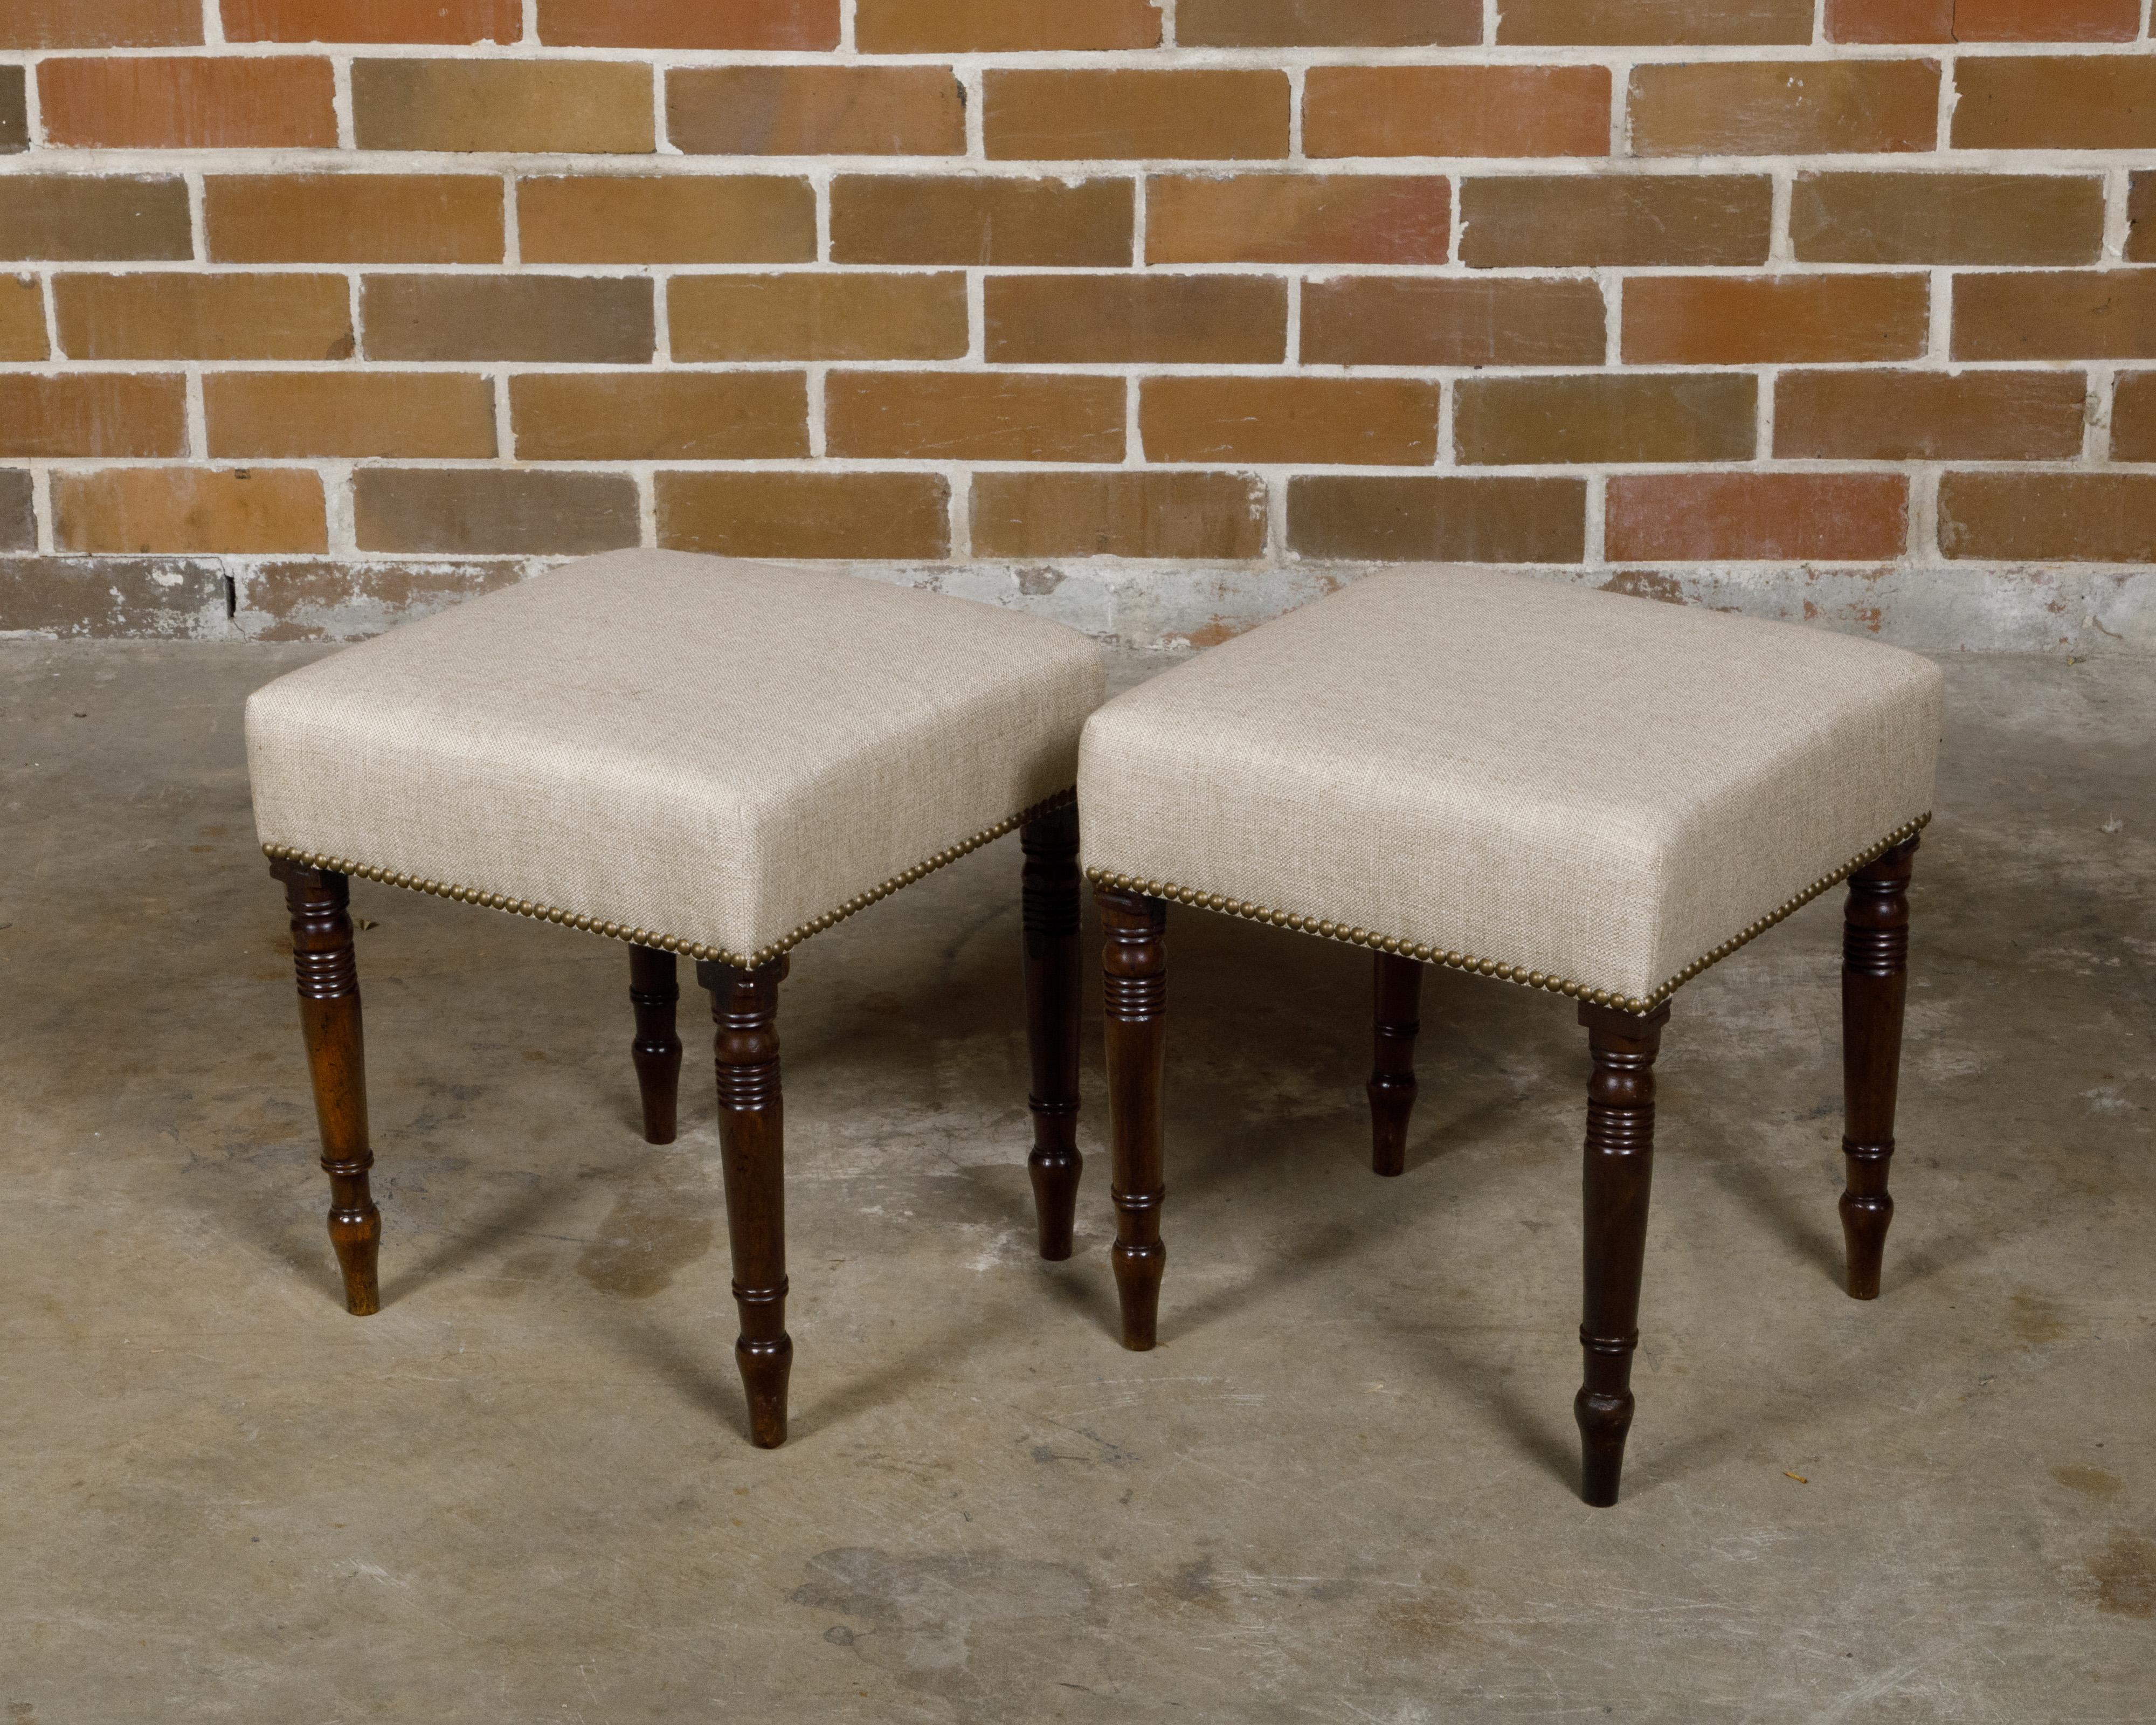 A pair of English Regency period mahogany stools from the 19th century with turned spindle shaped legs and linen upholstery. This pair of English Regency period mahogany stools, dating back to the 19th century, marries the elegance of classic design